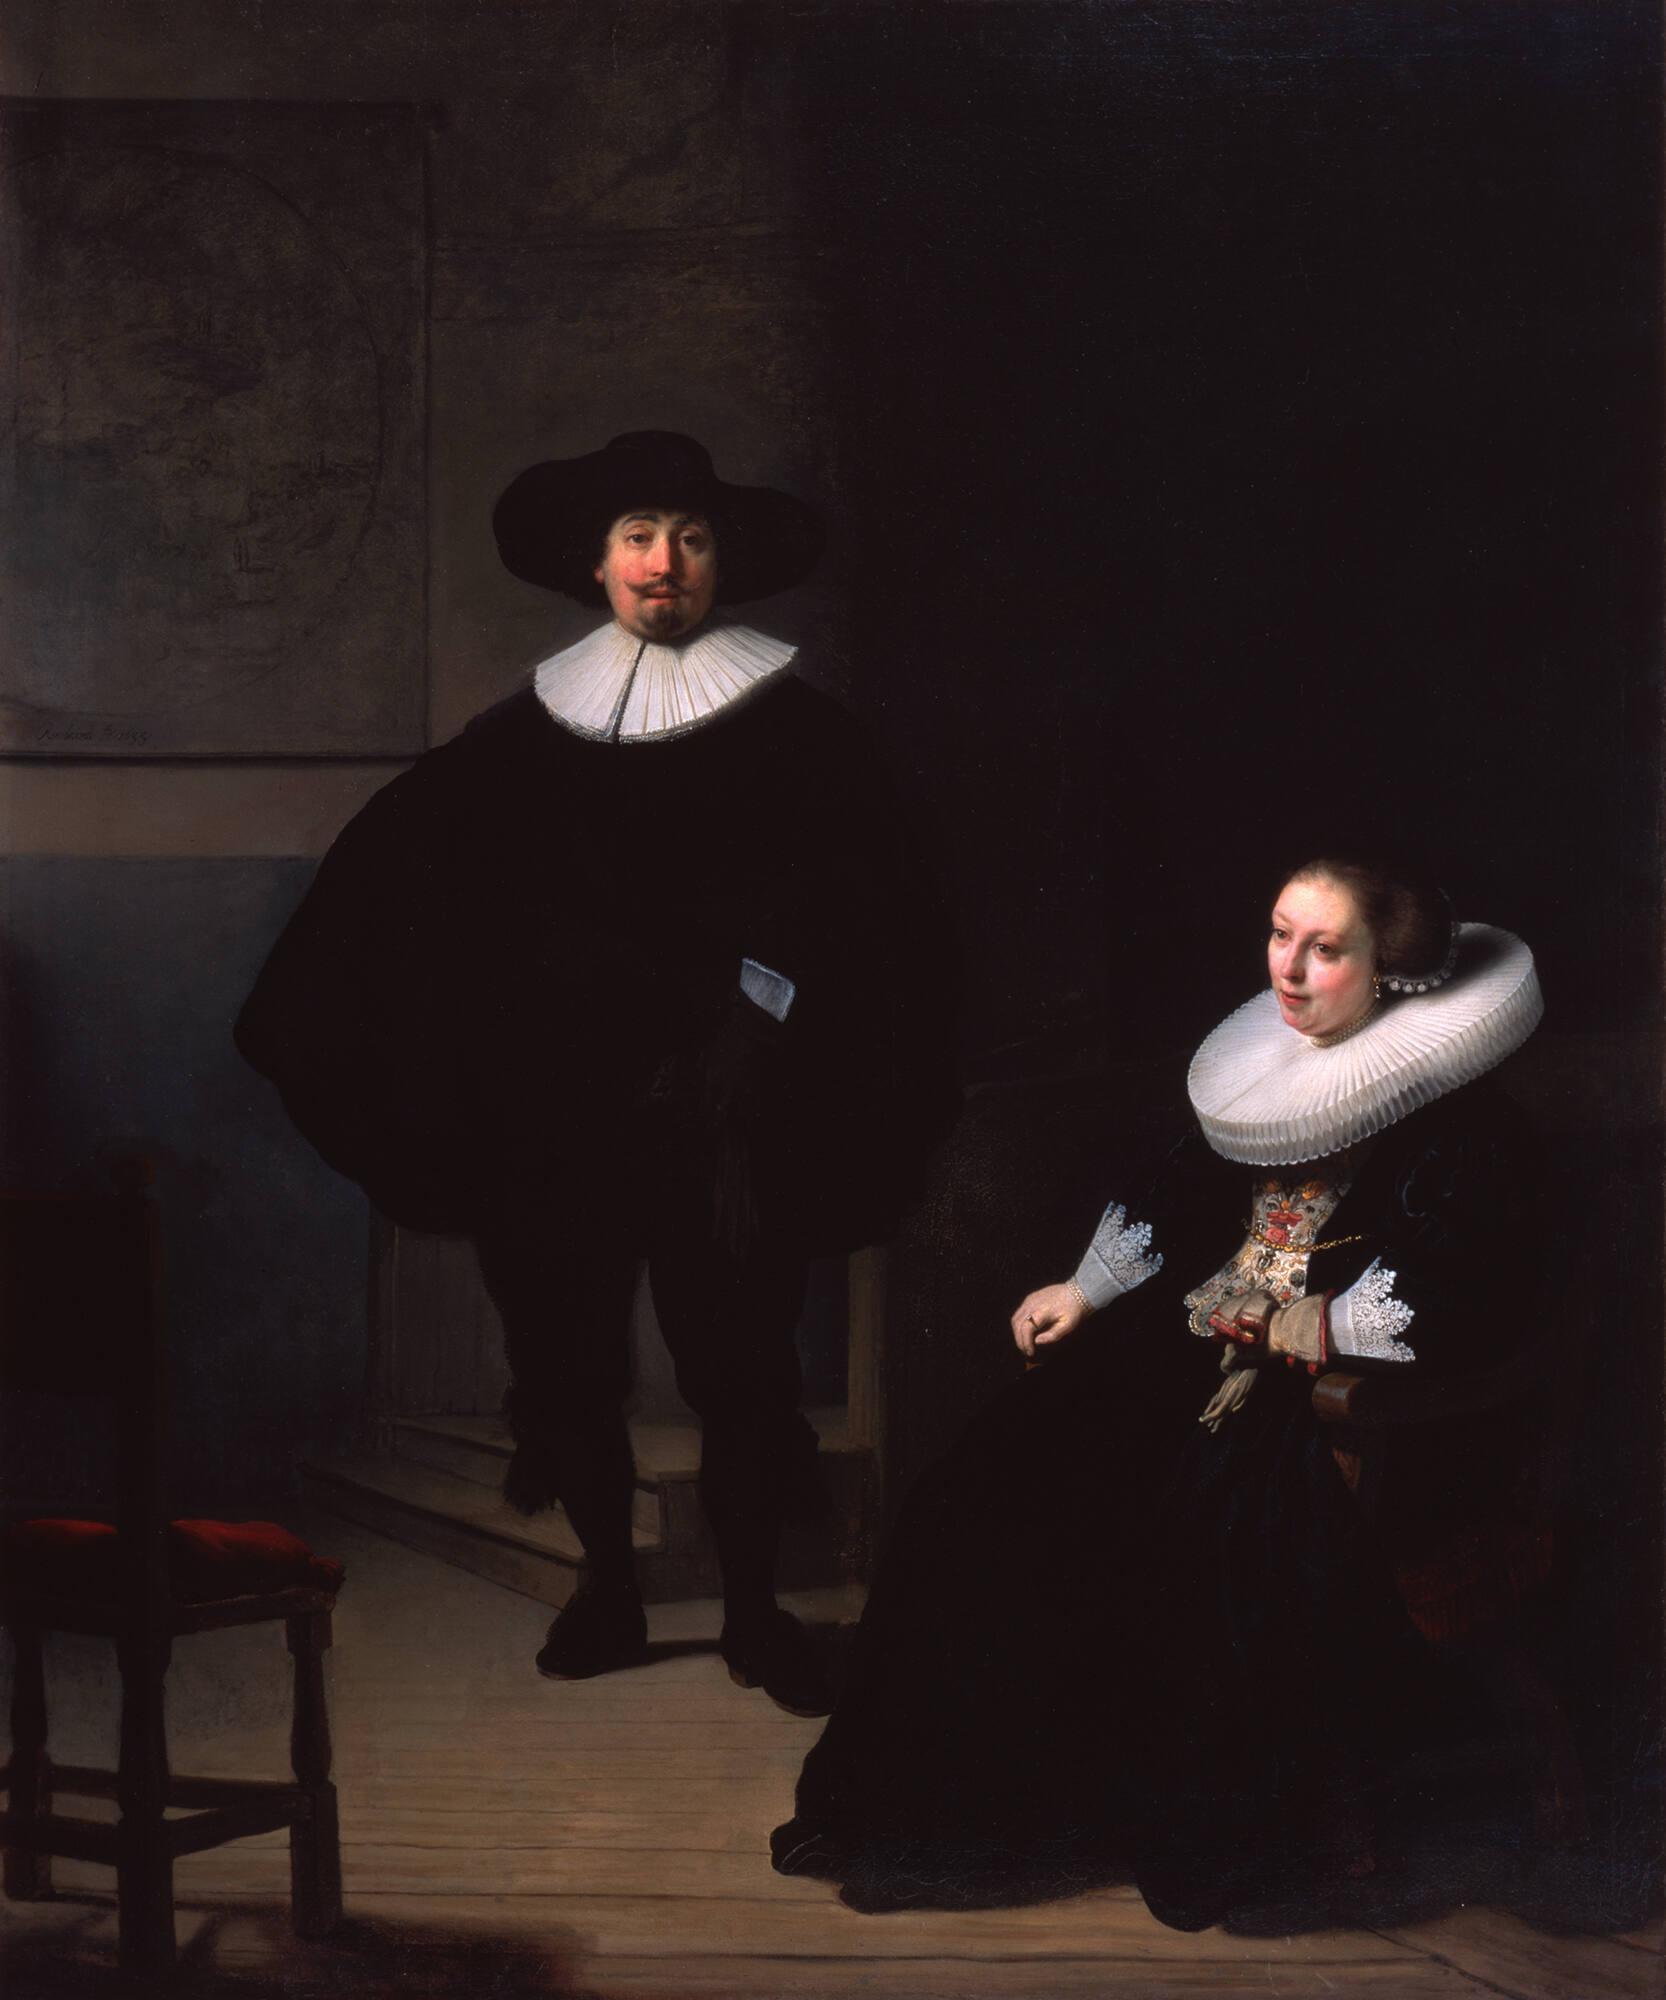 A man standing in a dark room with a hat and a woman sitting next to him.